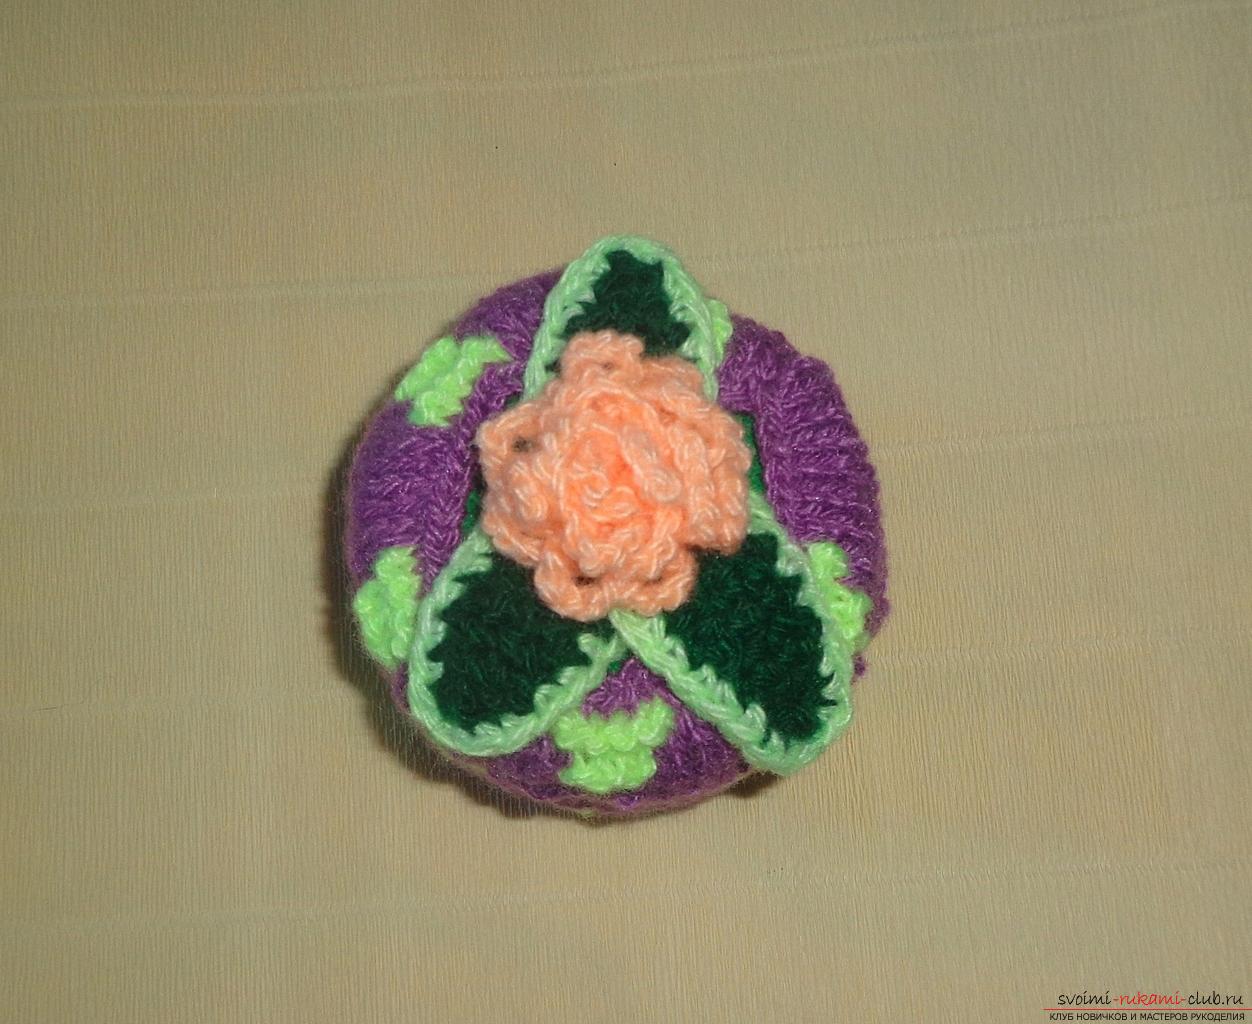 This master class of crochet crochet contains a rose pattern and a description of knitting .. Photo # 33